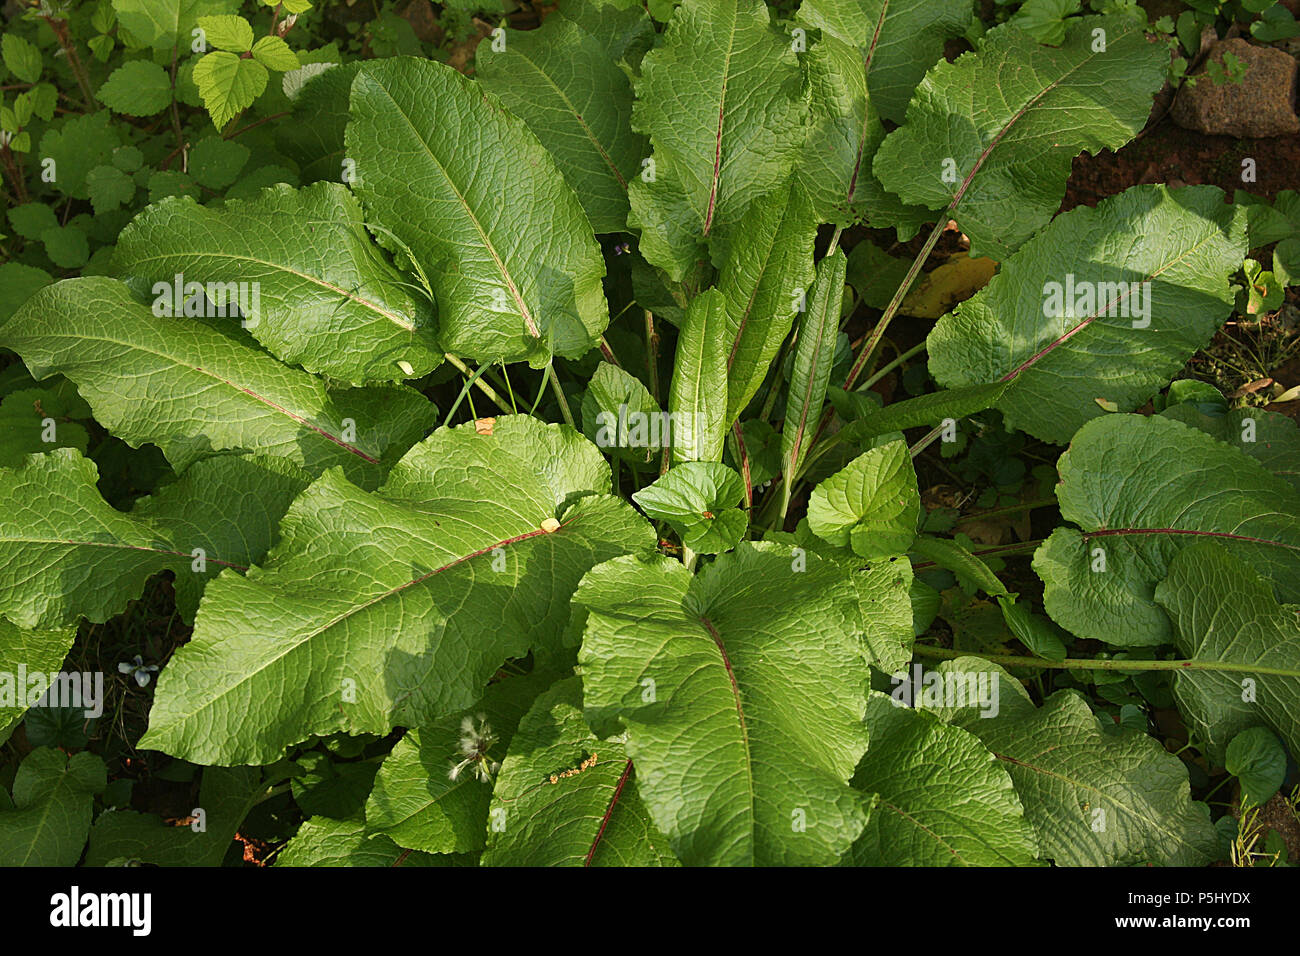 Broad-leaved dock weed Stock Photo